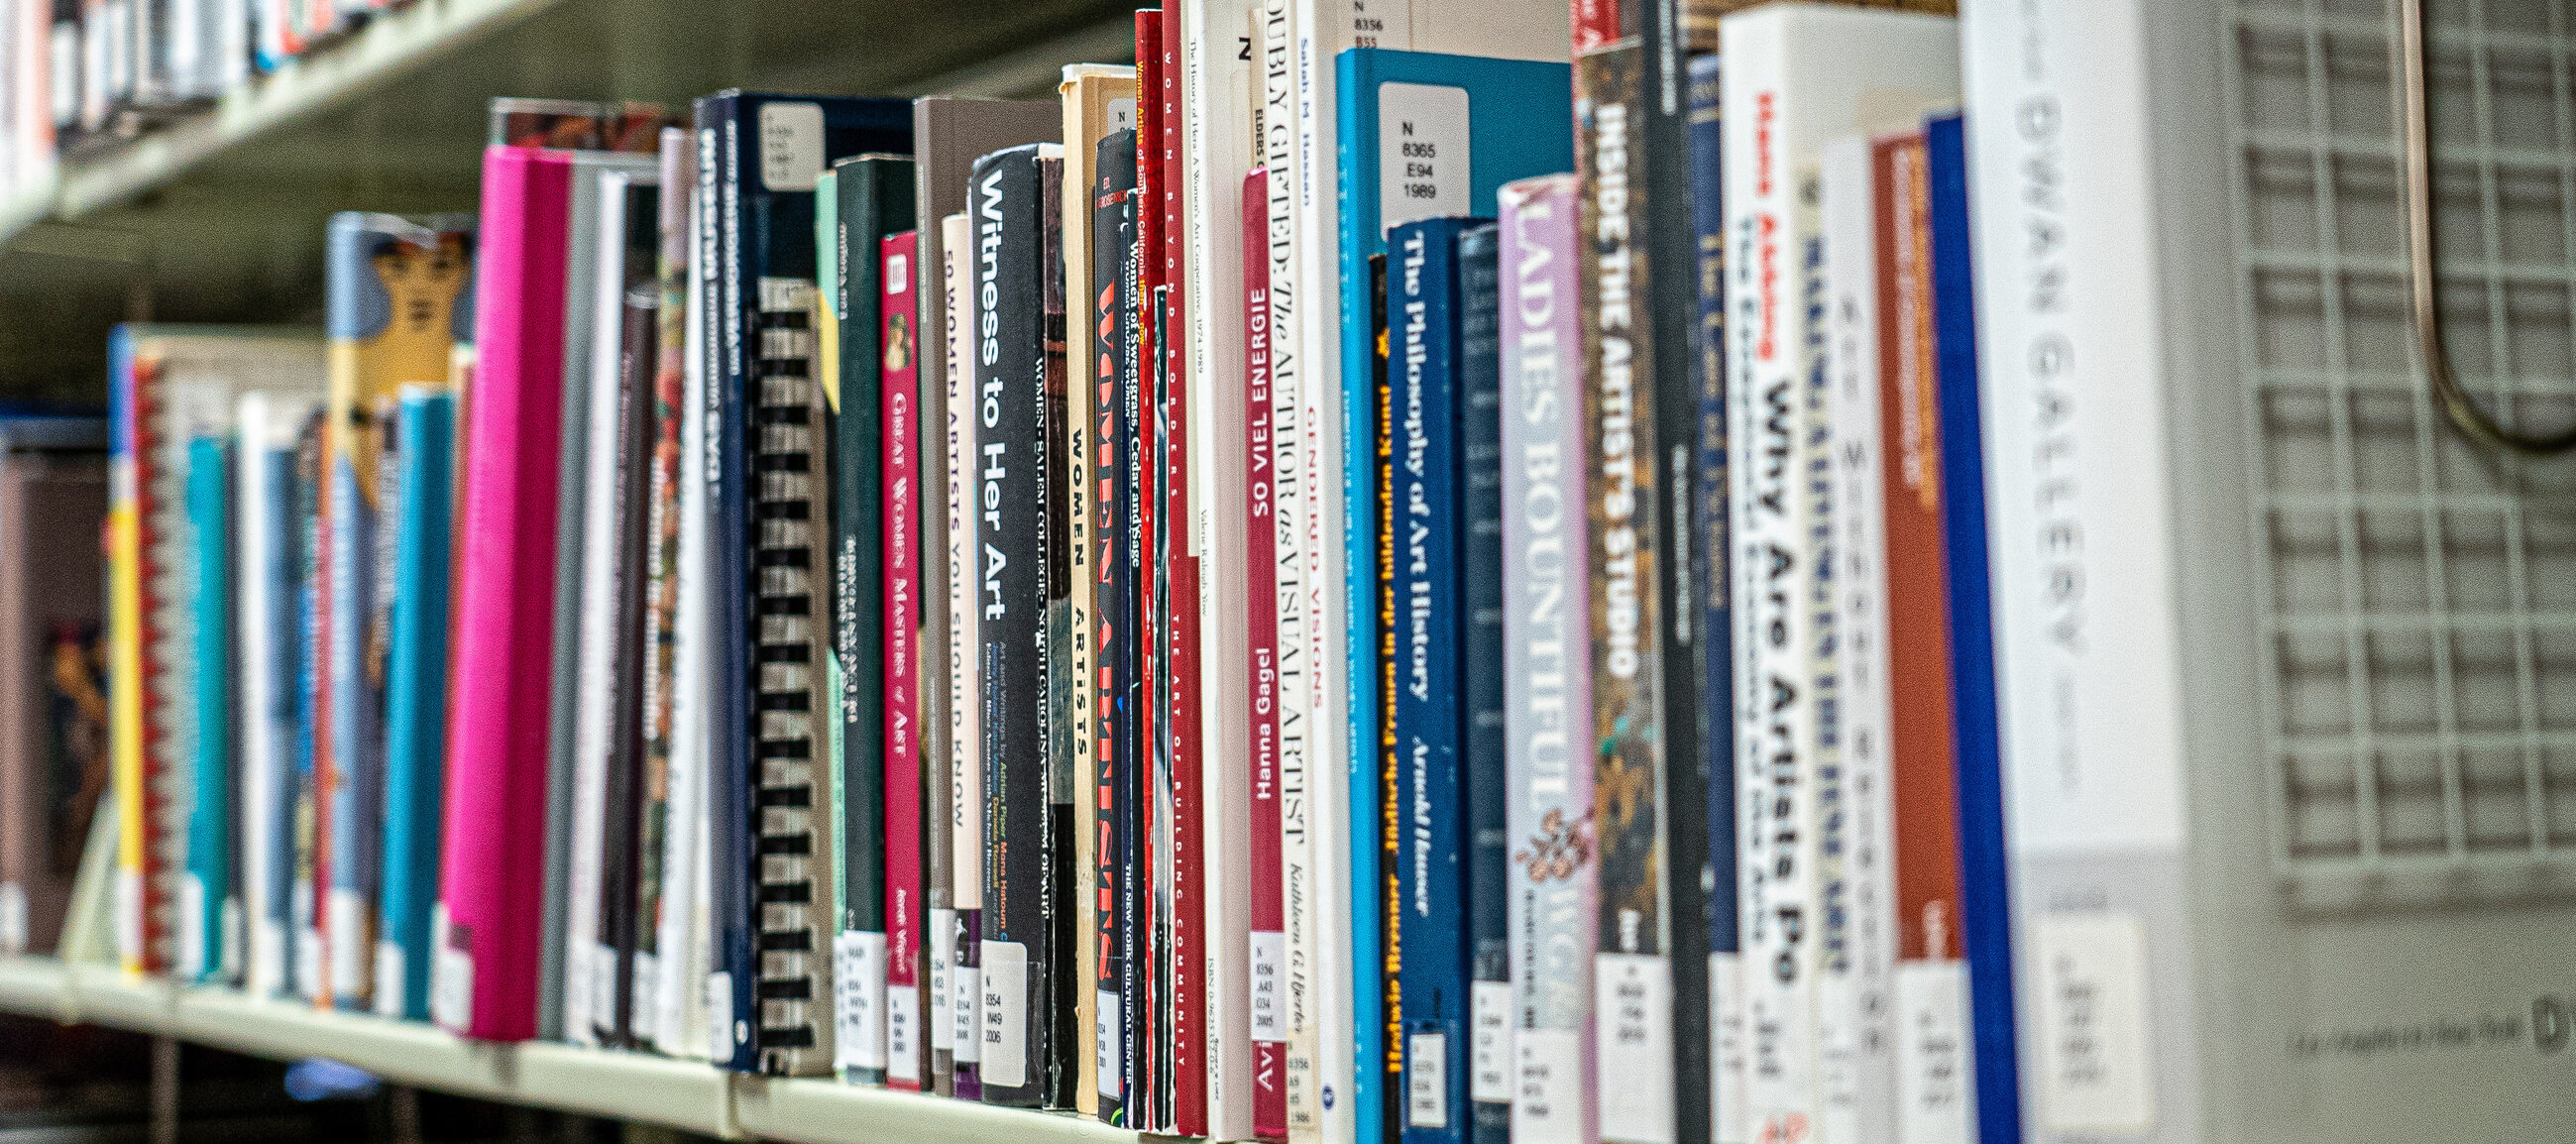 A bookshelf packed with colorful books about women artists.